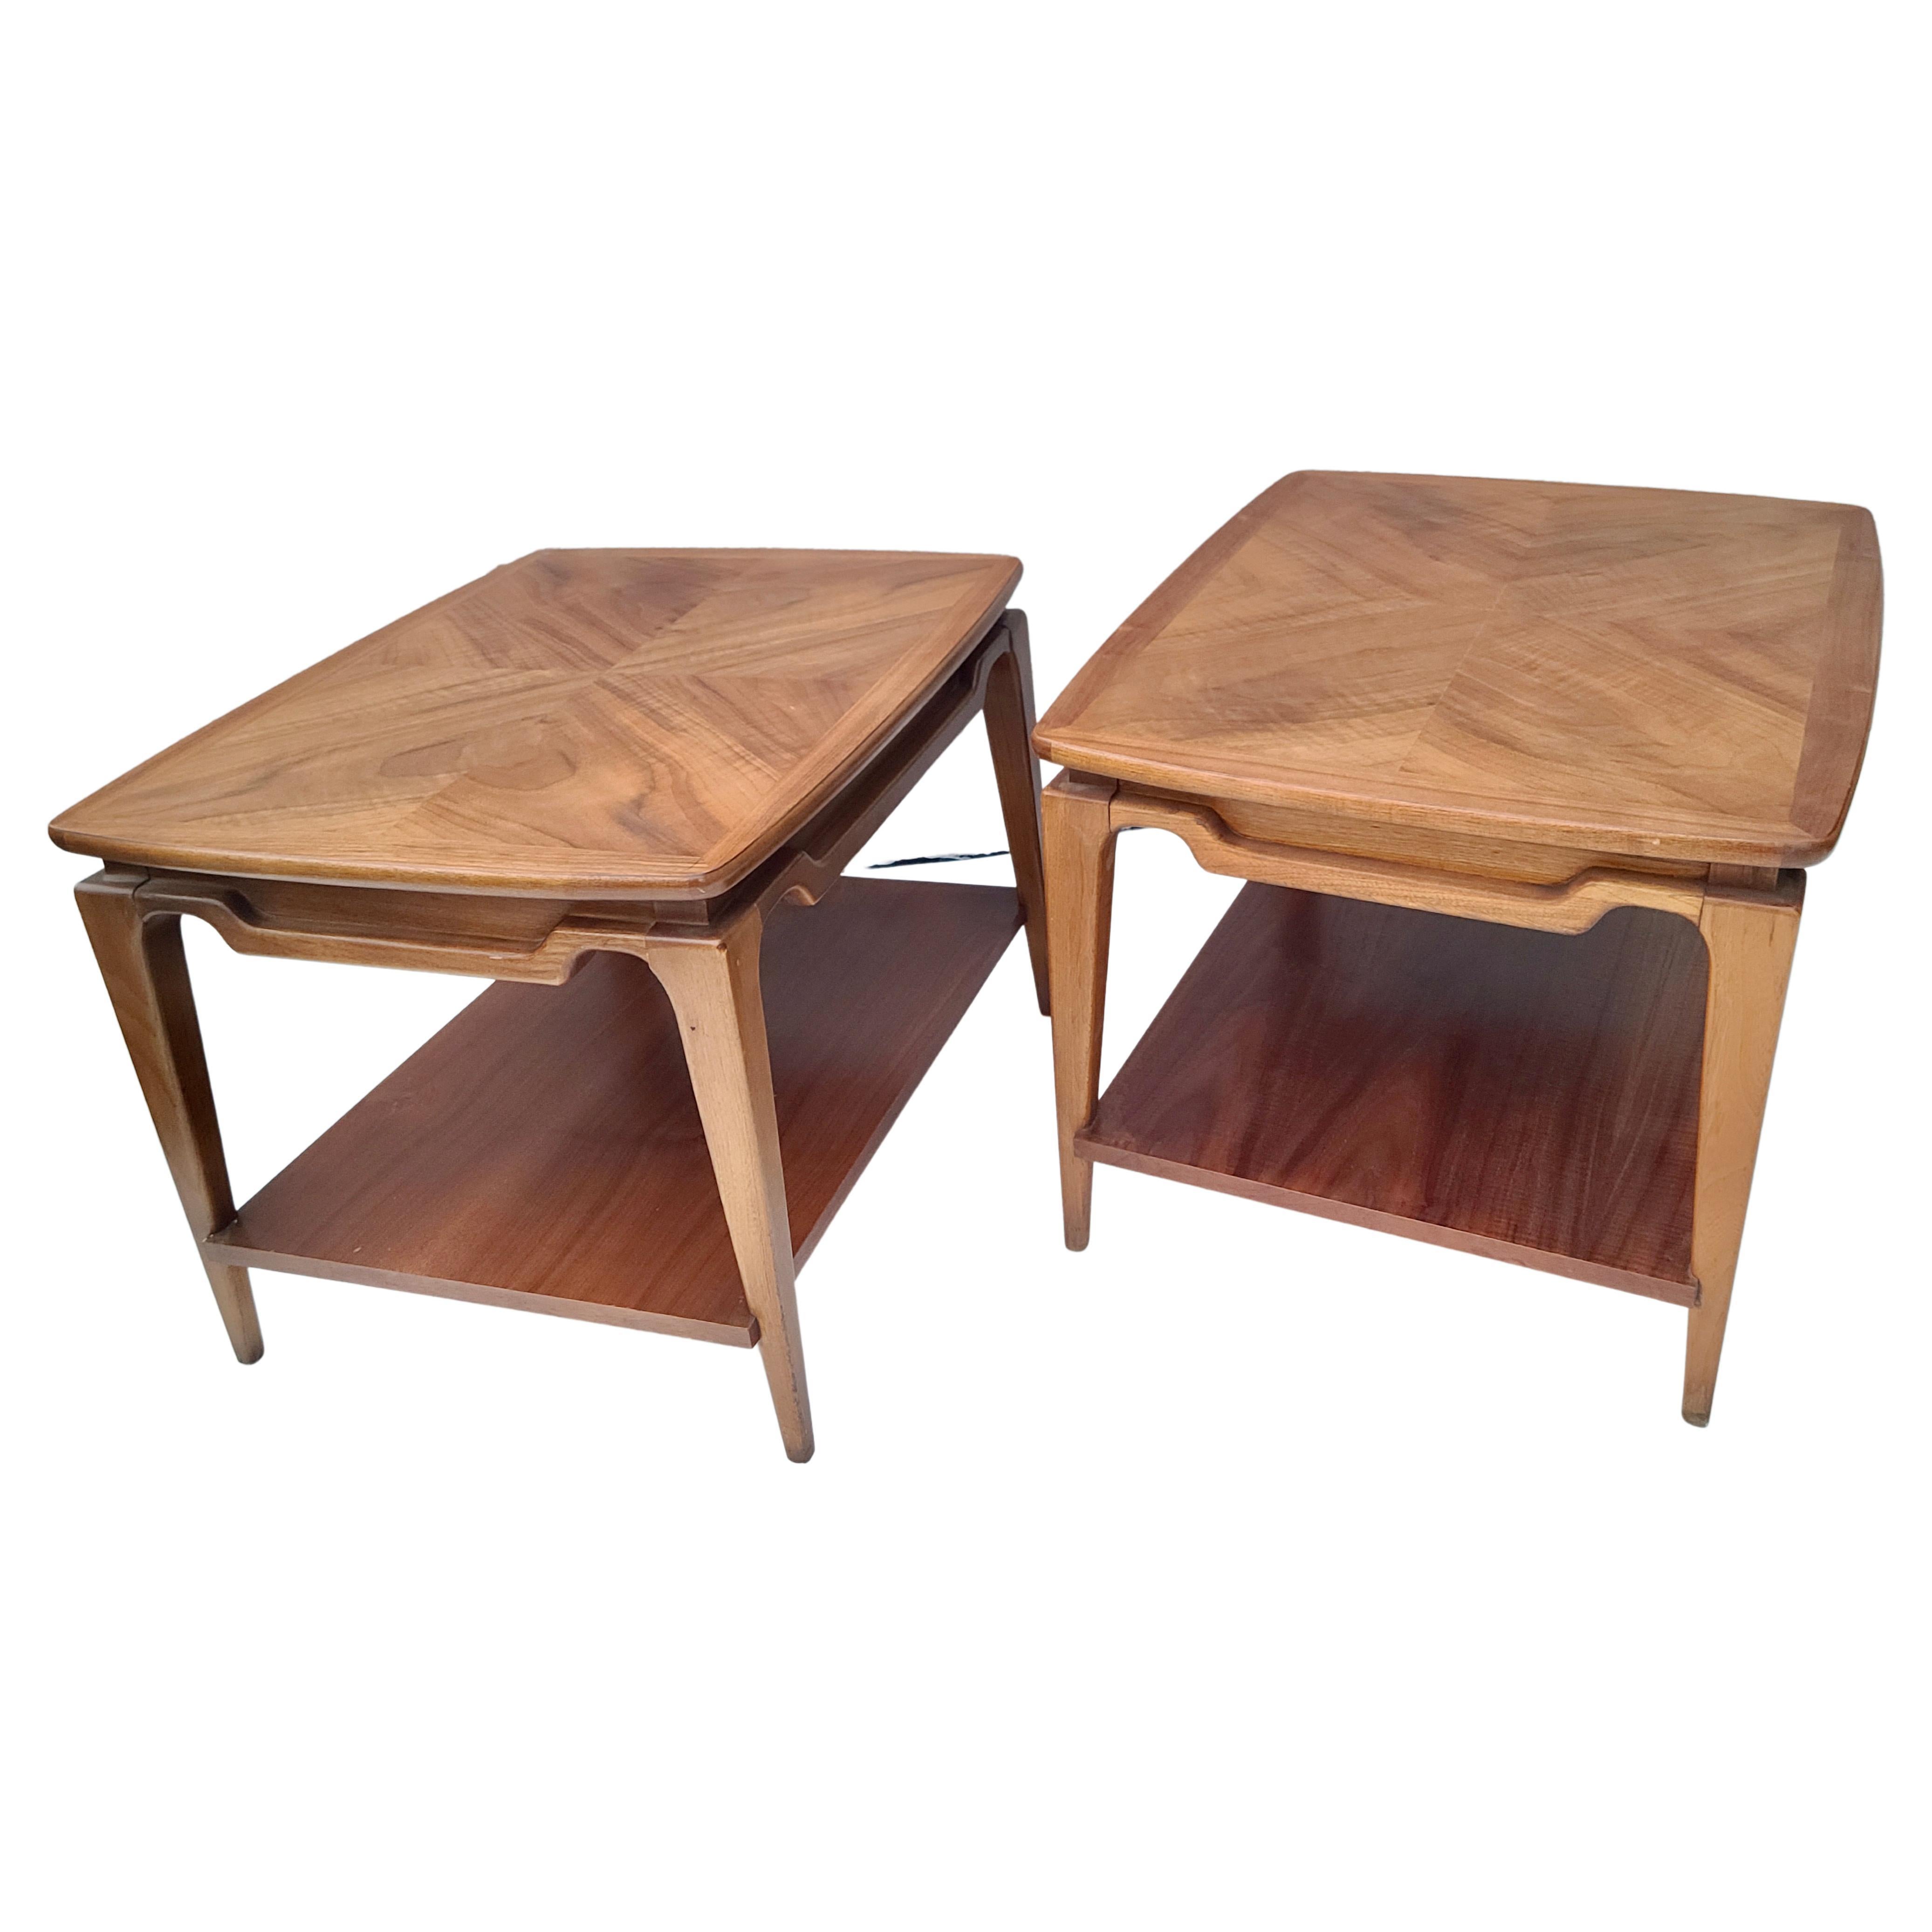 Please feel free to reach out for accurate shipping quote to your location.

Pair Walnut two tier end tables by Lane.